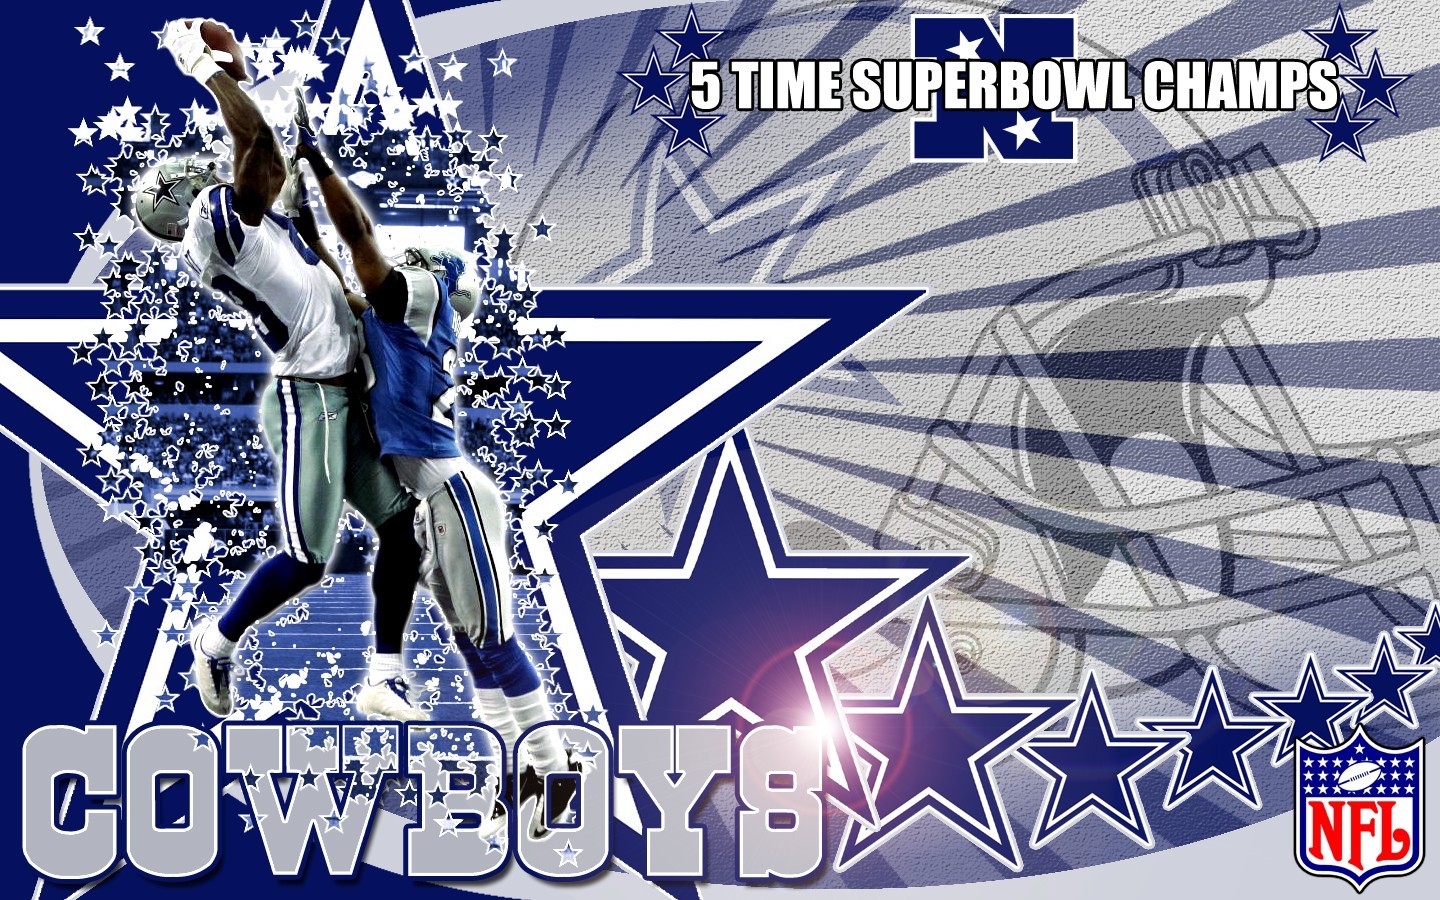 You Like This Dallas Cowboys Wallpaper HD As Much We Do